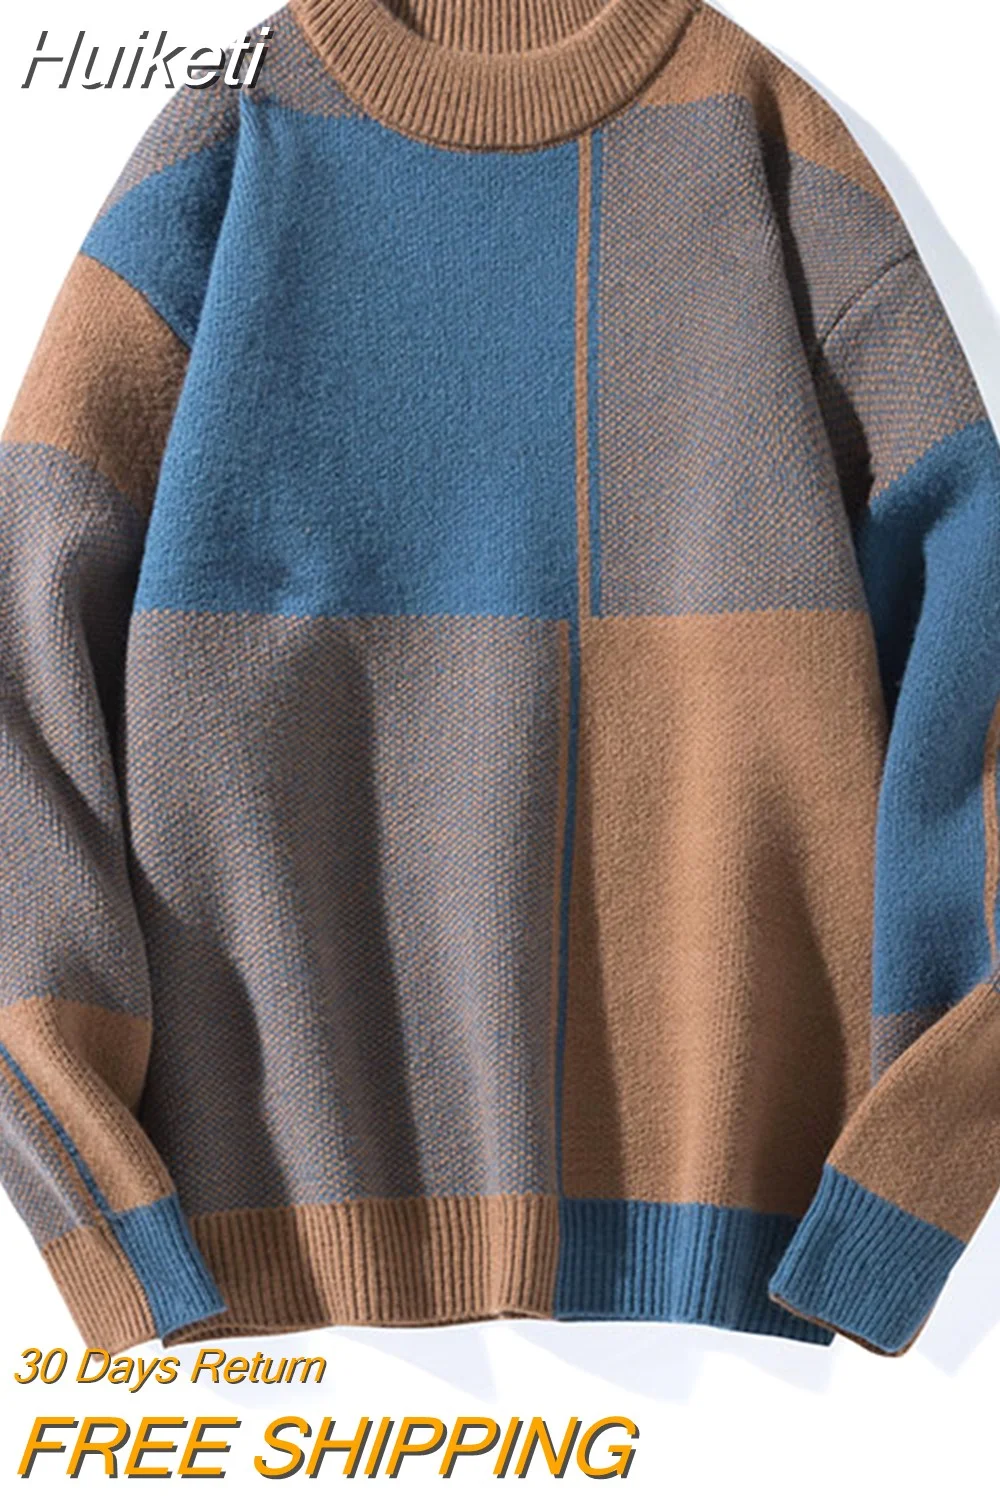 Huiketi Causal Sweater Men Warm Half Turtleneck Pullover Knitted Sweater Men Fashion Patchwork Knitting Pullovers Loose Sweaters